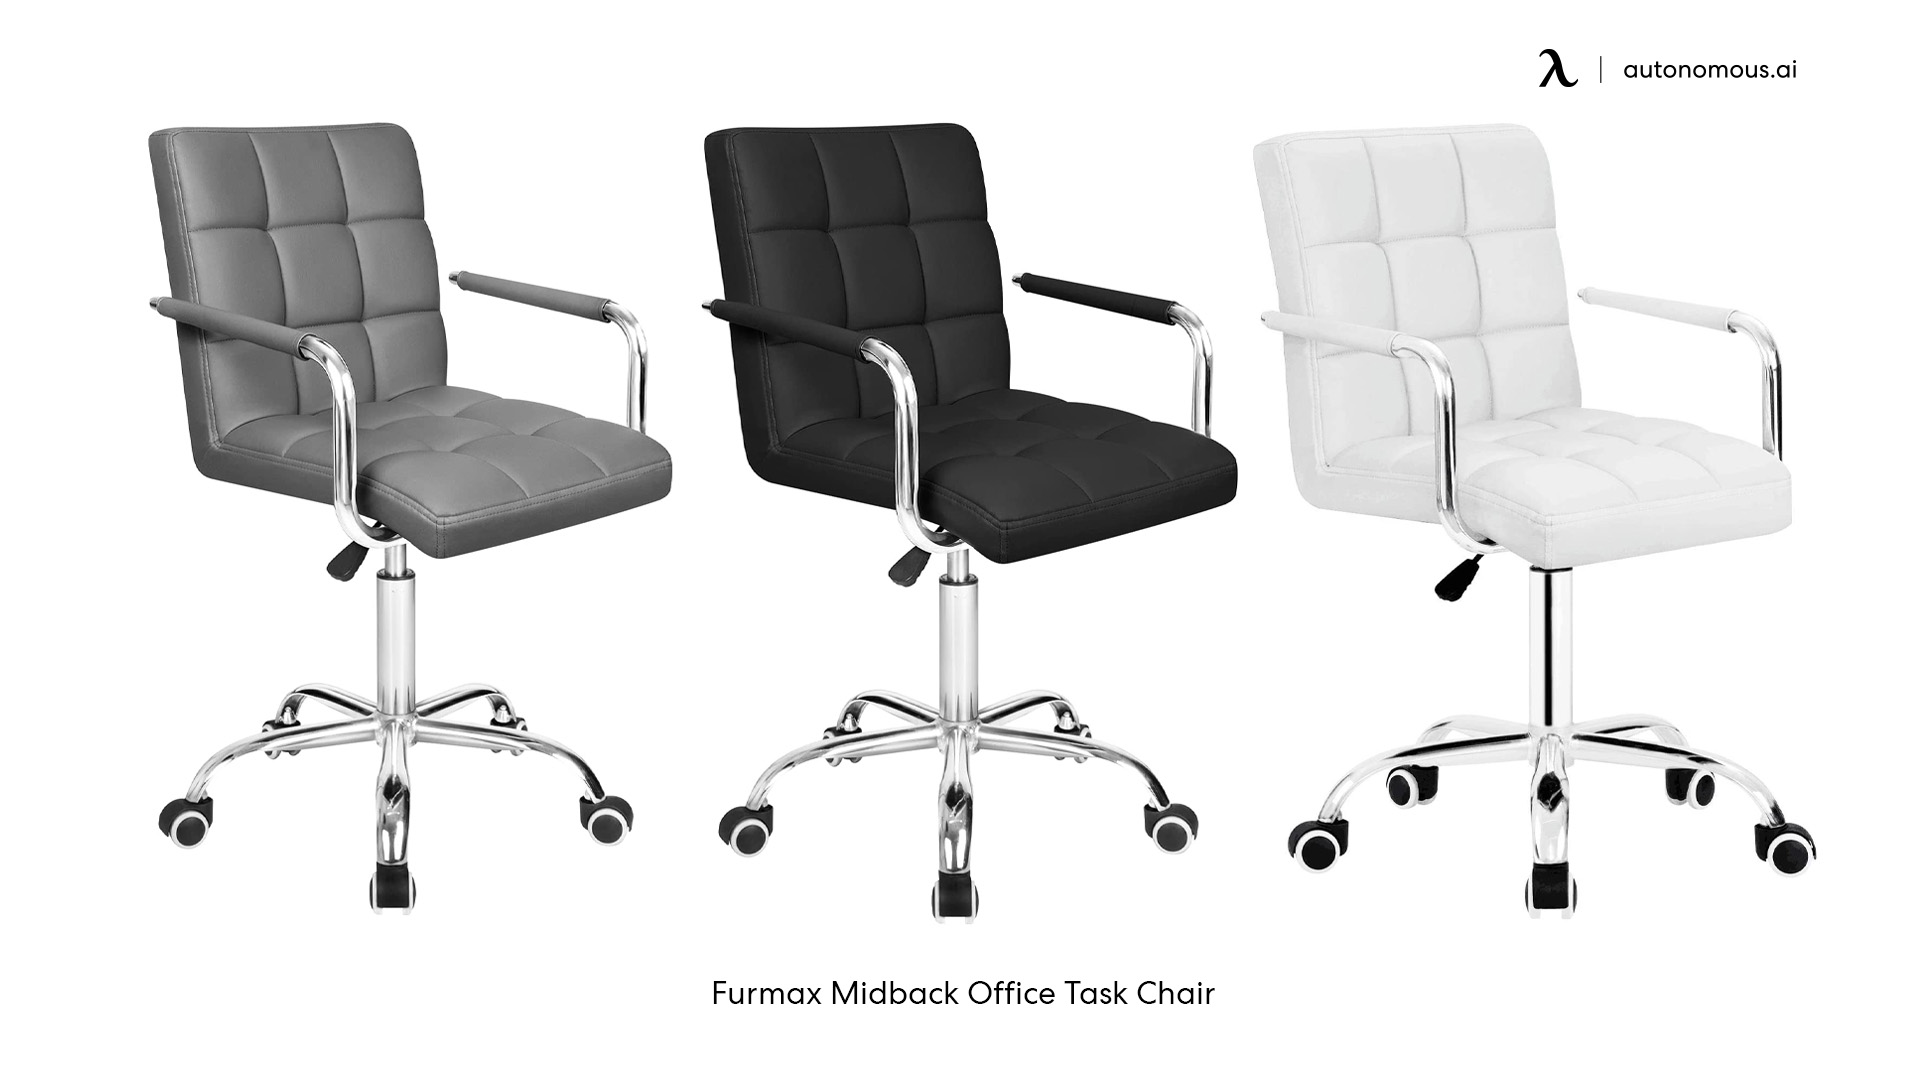 Furmax conference chairs with wheels